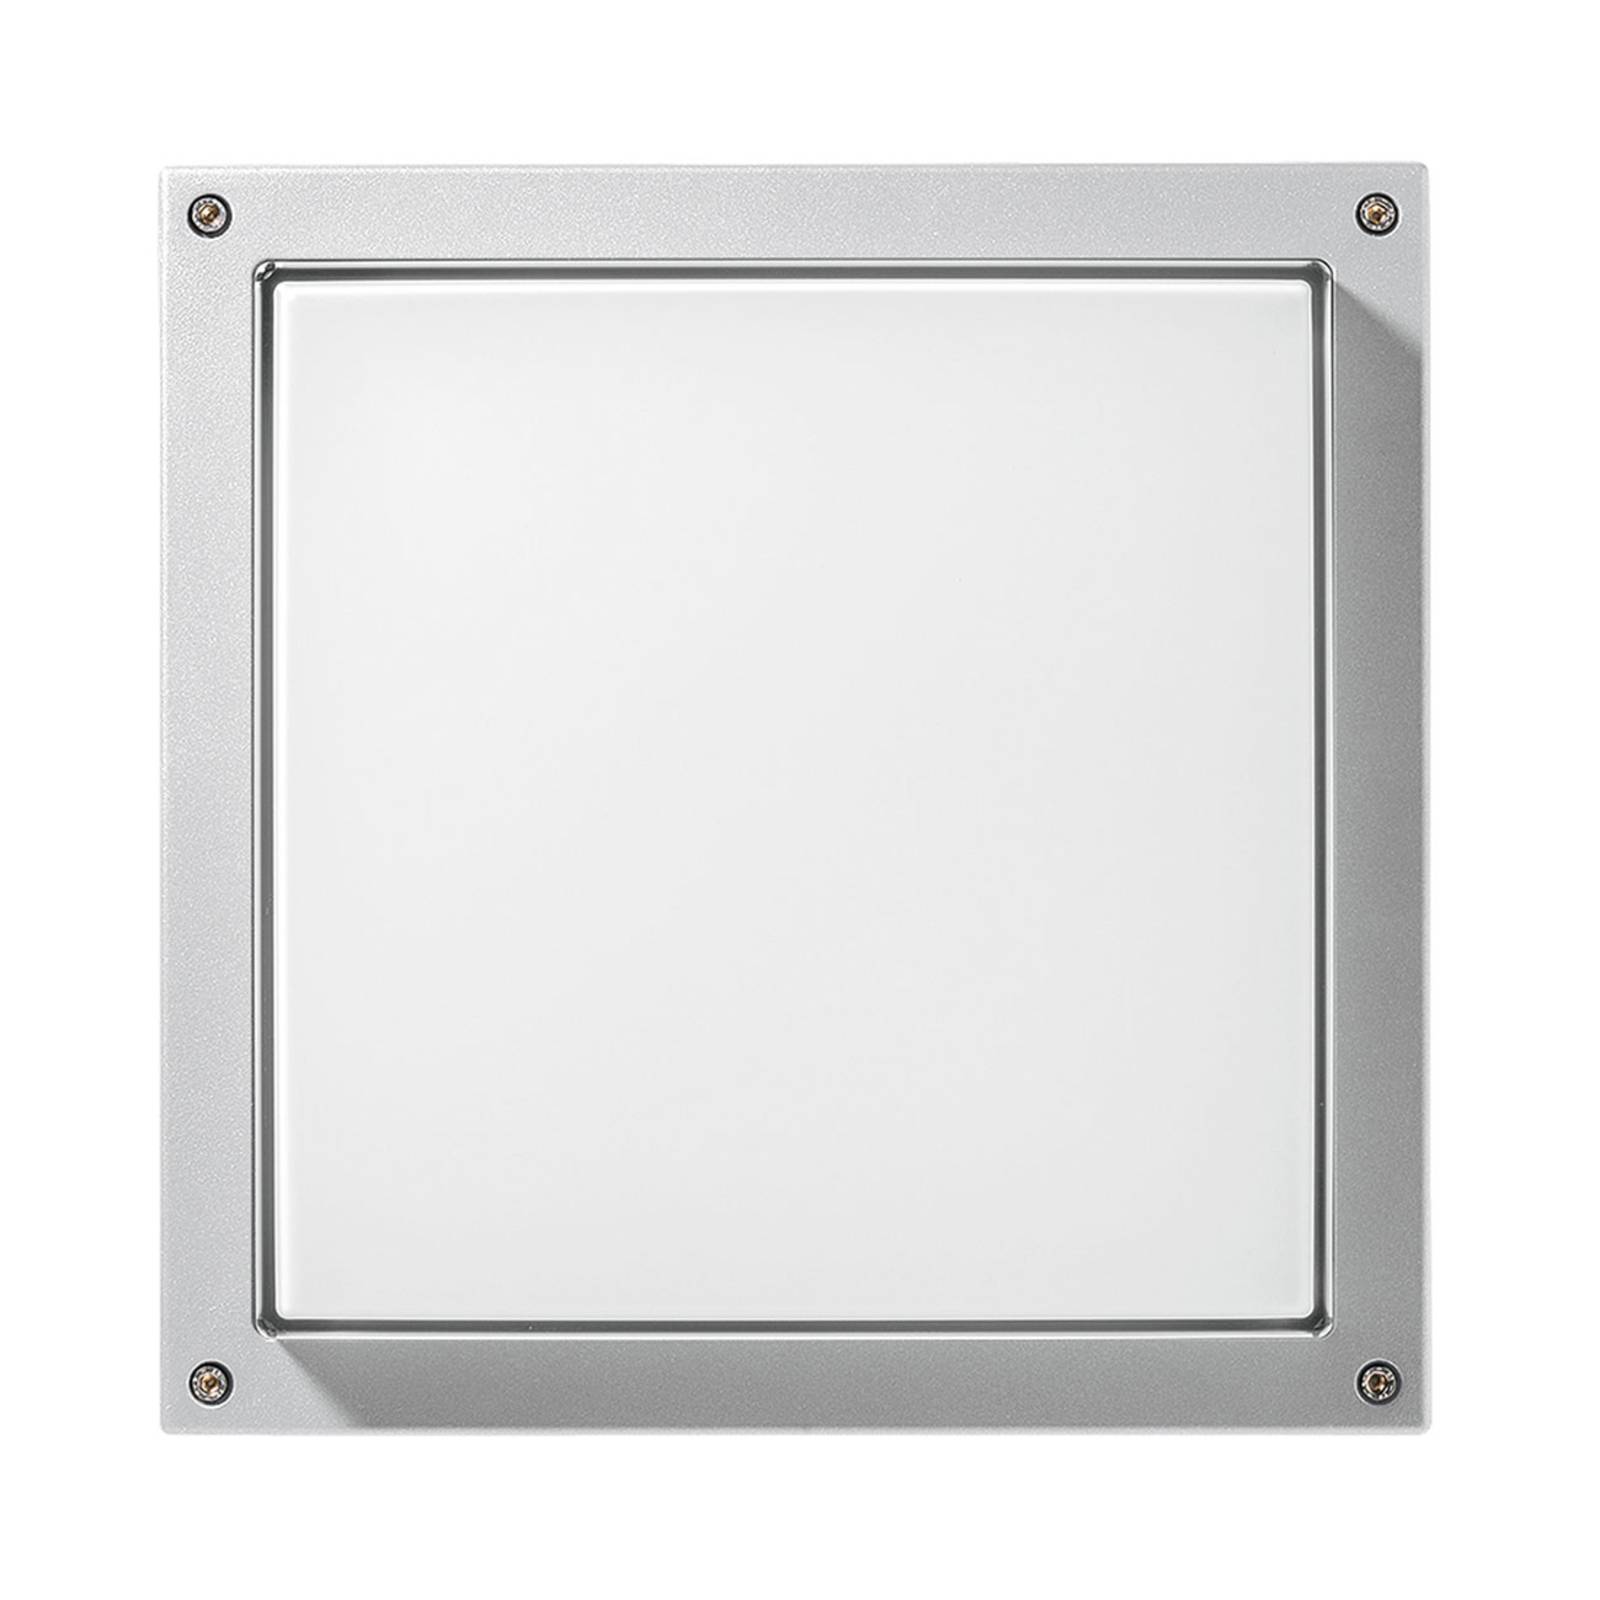 Image of Applique Bliz Square 40, 3 000 K blanche dimmable 8018367639155